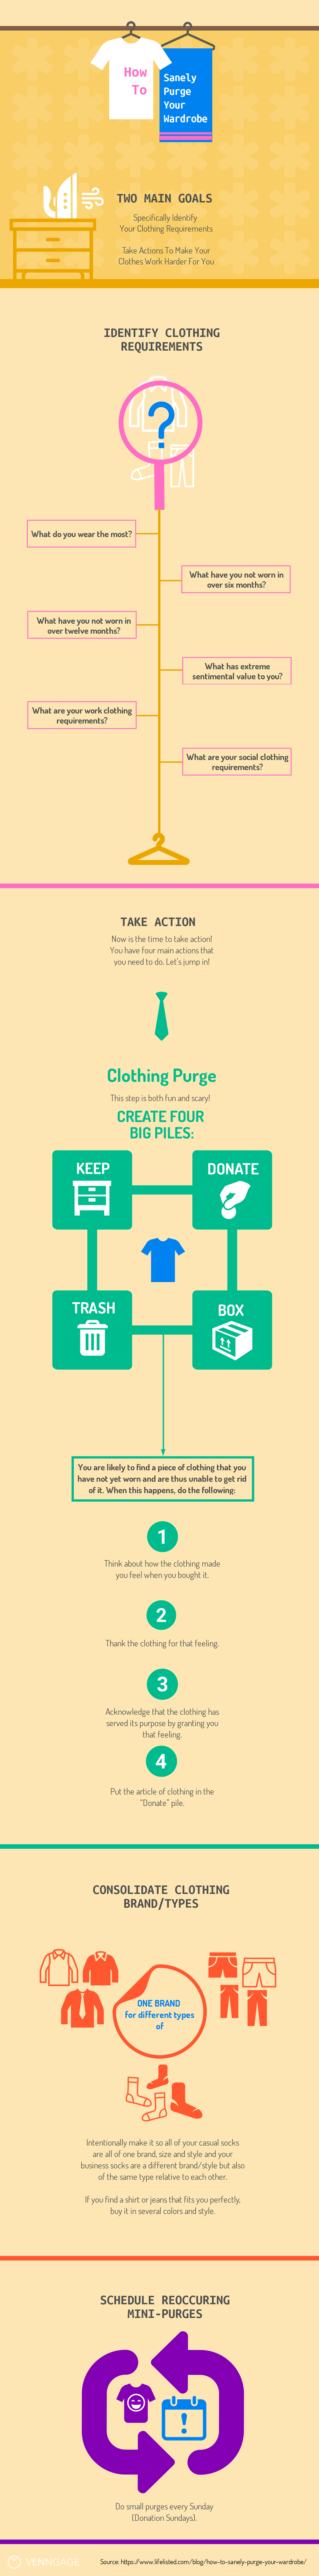 How To Sanely Purge Your Wardrobe Infographic by Venngage